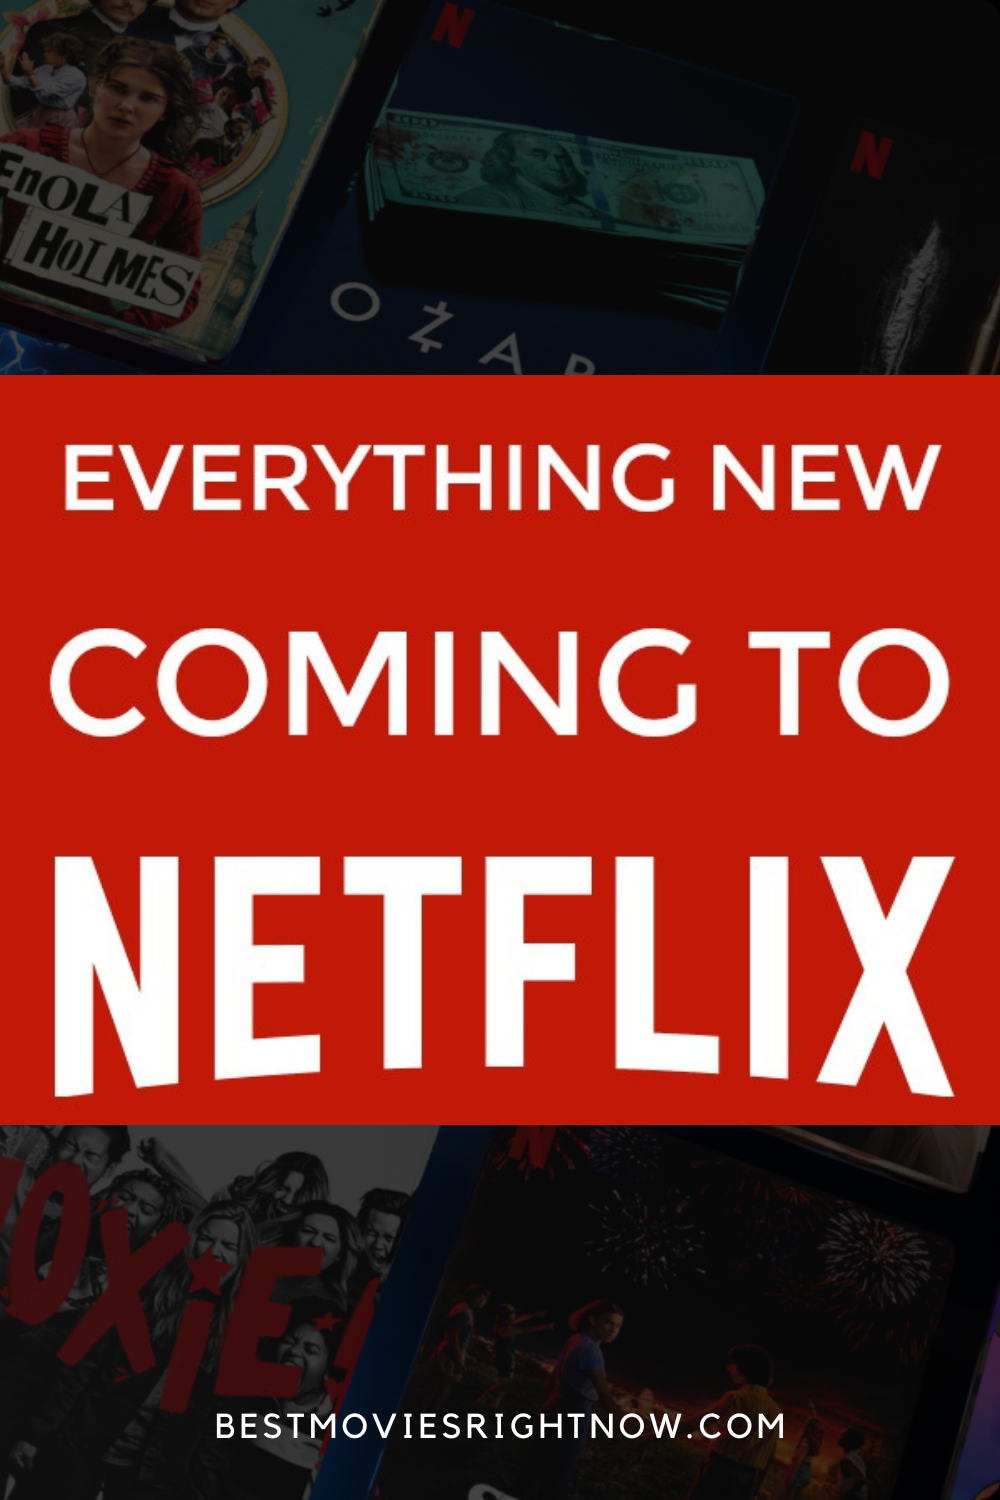 new to Netflix image with text